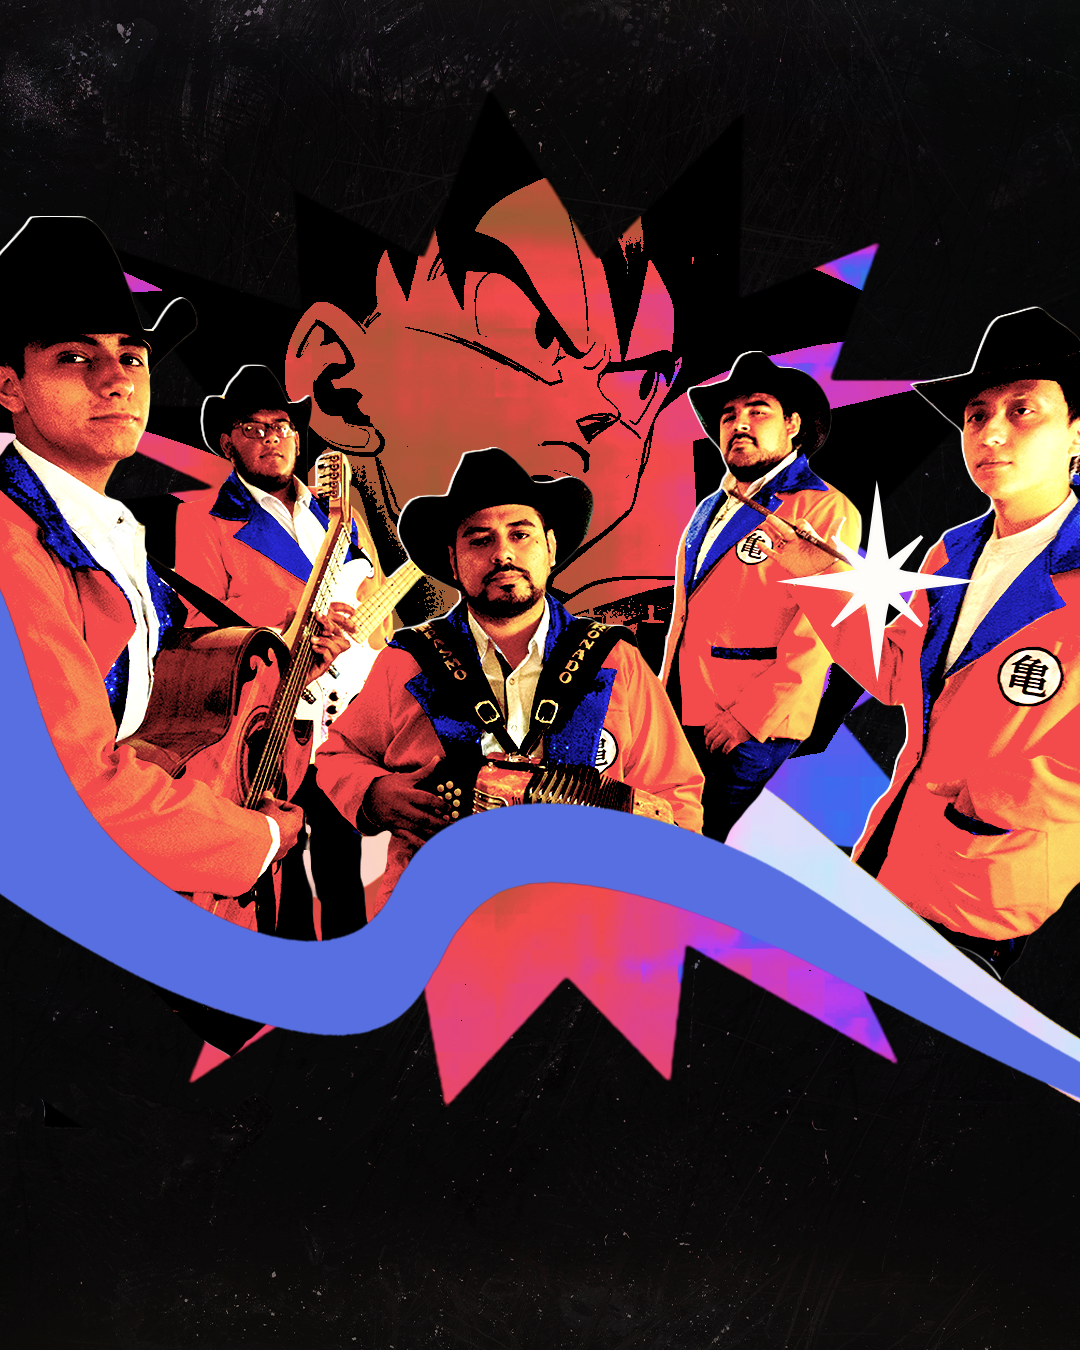 Meet Los Shinigamis del Norte, a band that fuses a love of anime with norteño